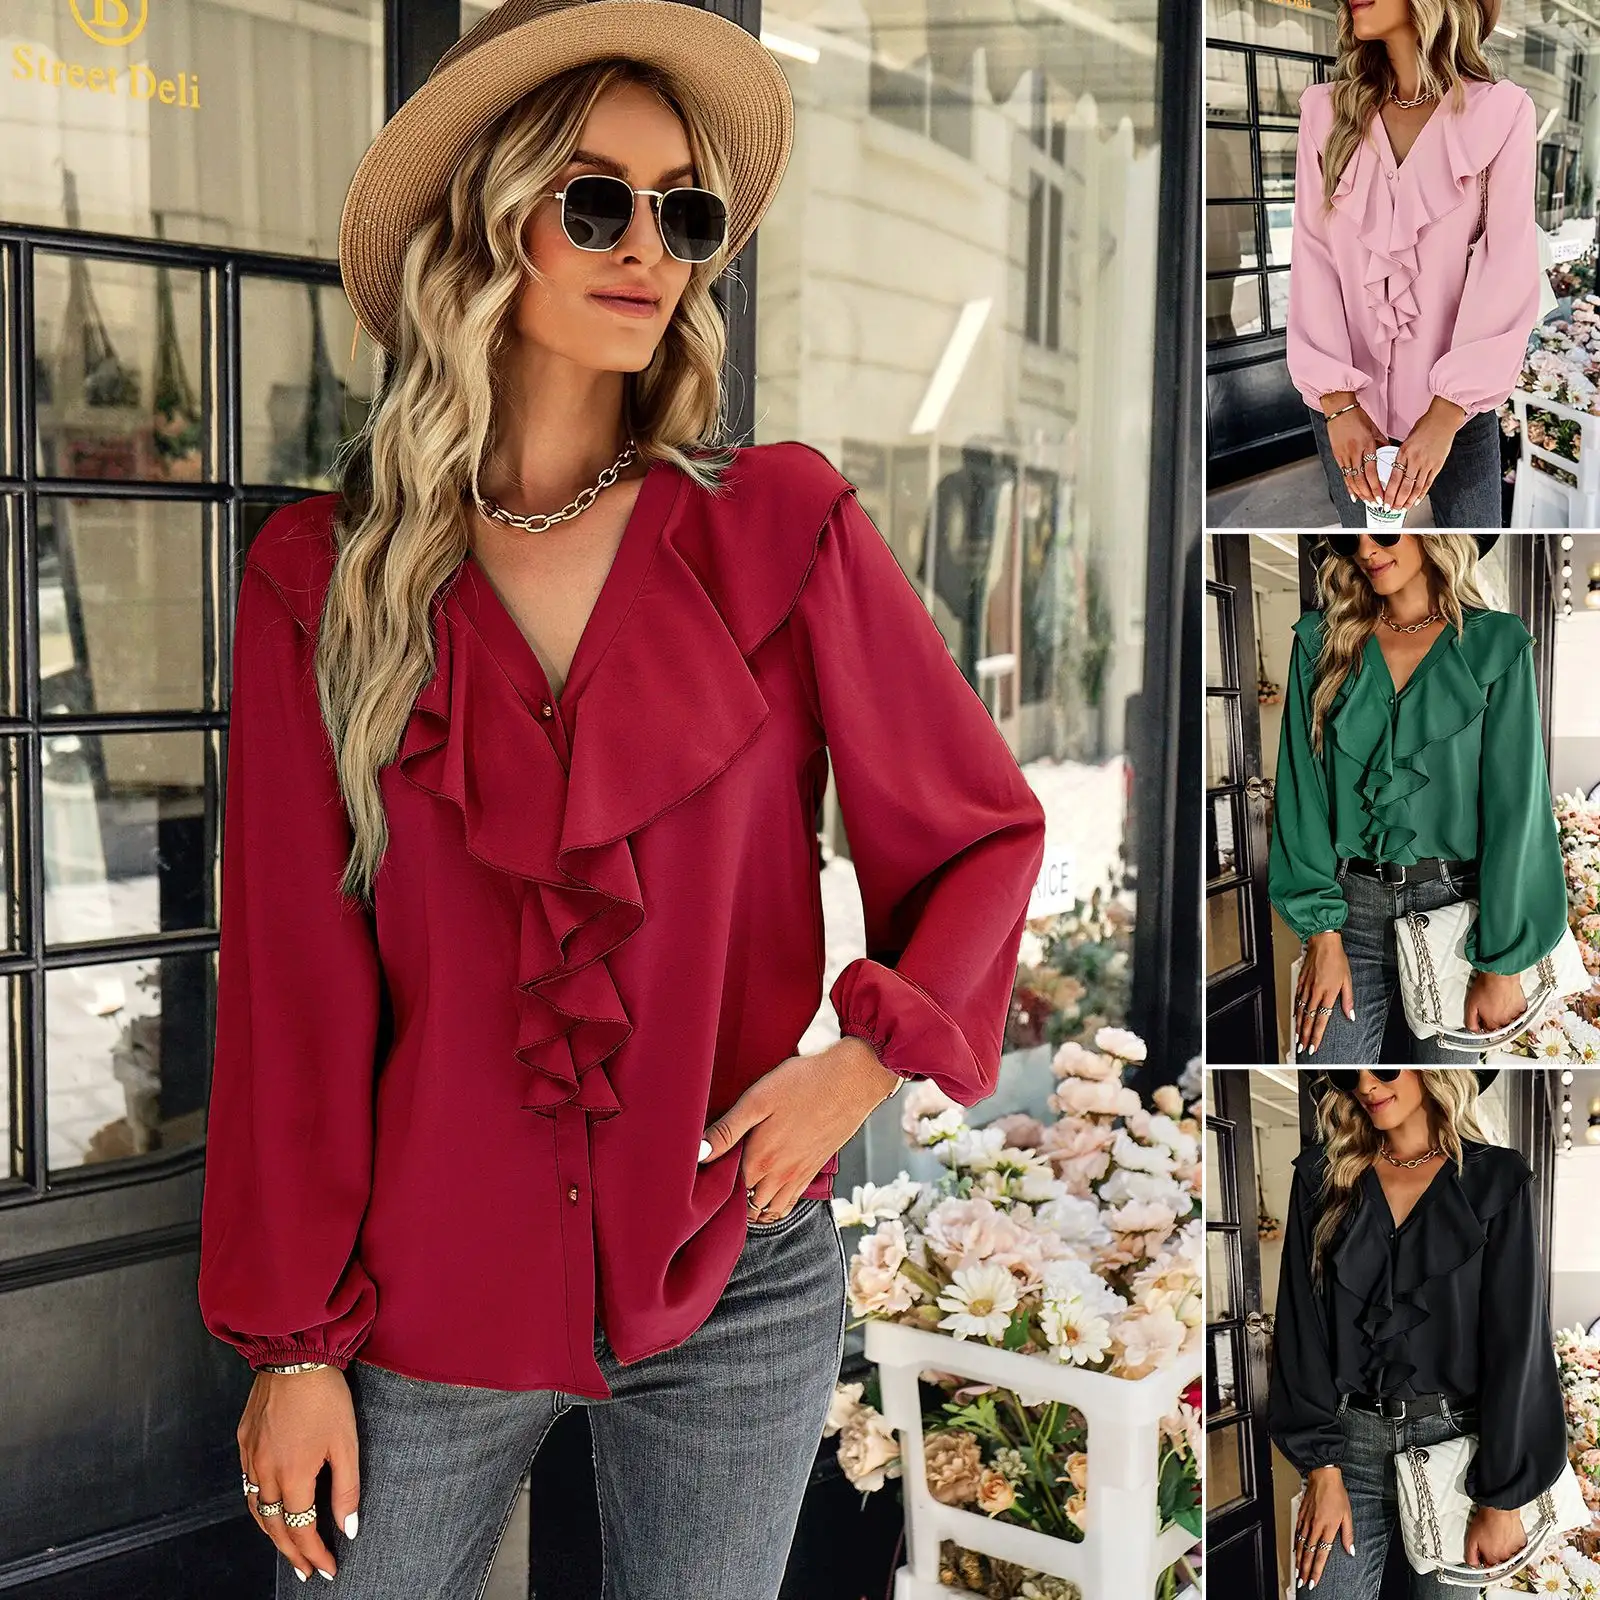 New Arrival Wholesale Ladies Long Sleeve Loose Casual Shirts Autumn V Neck Ruffle Chiffon Blouse Tops ISO Factory